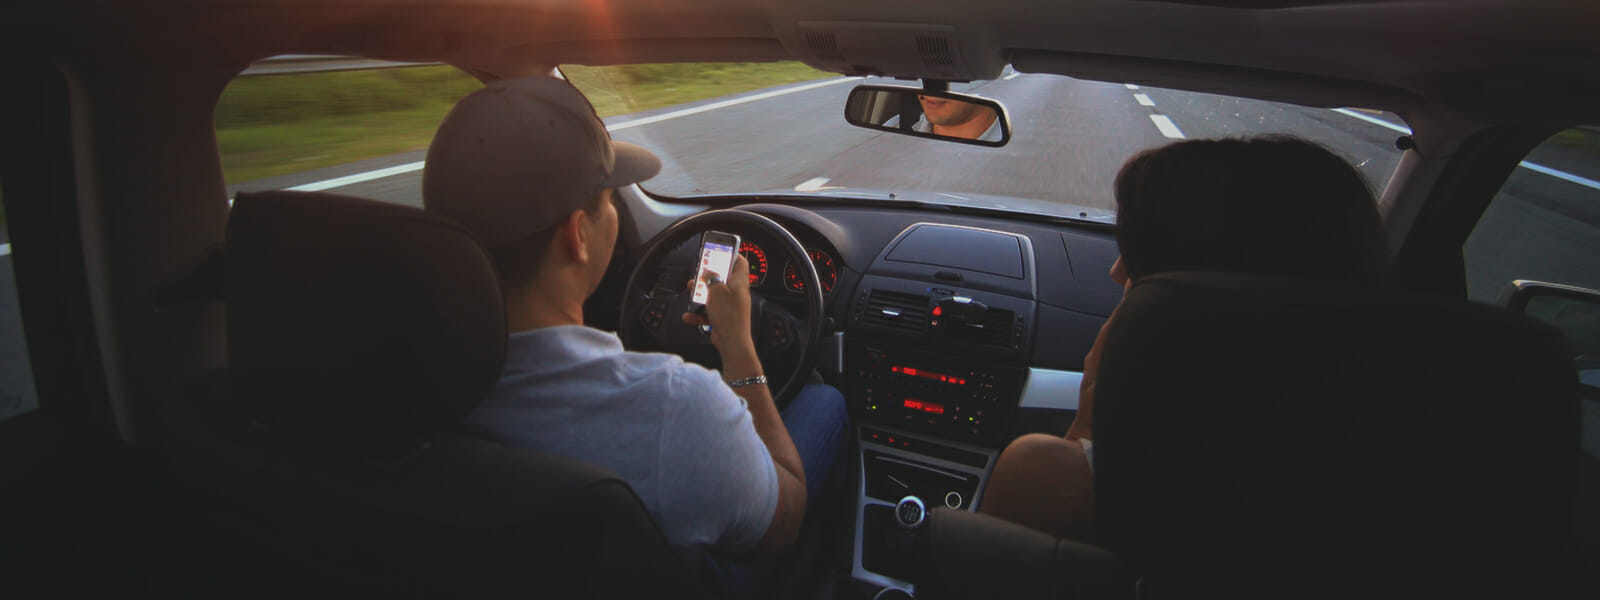 distracted driving - texting